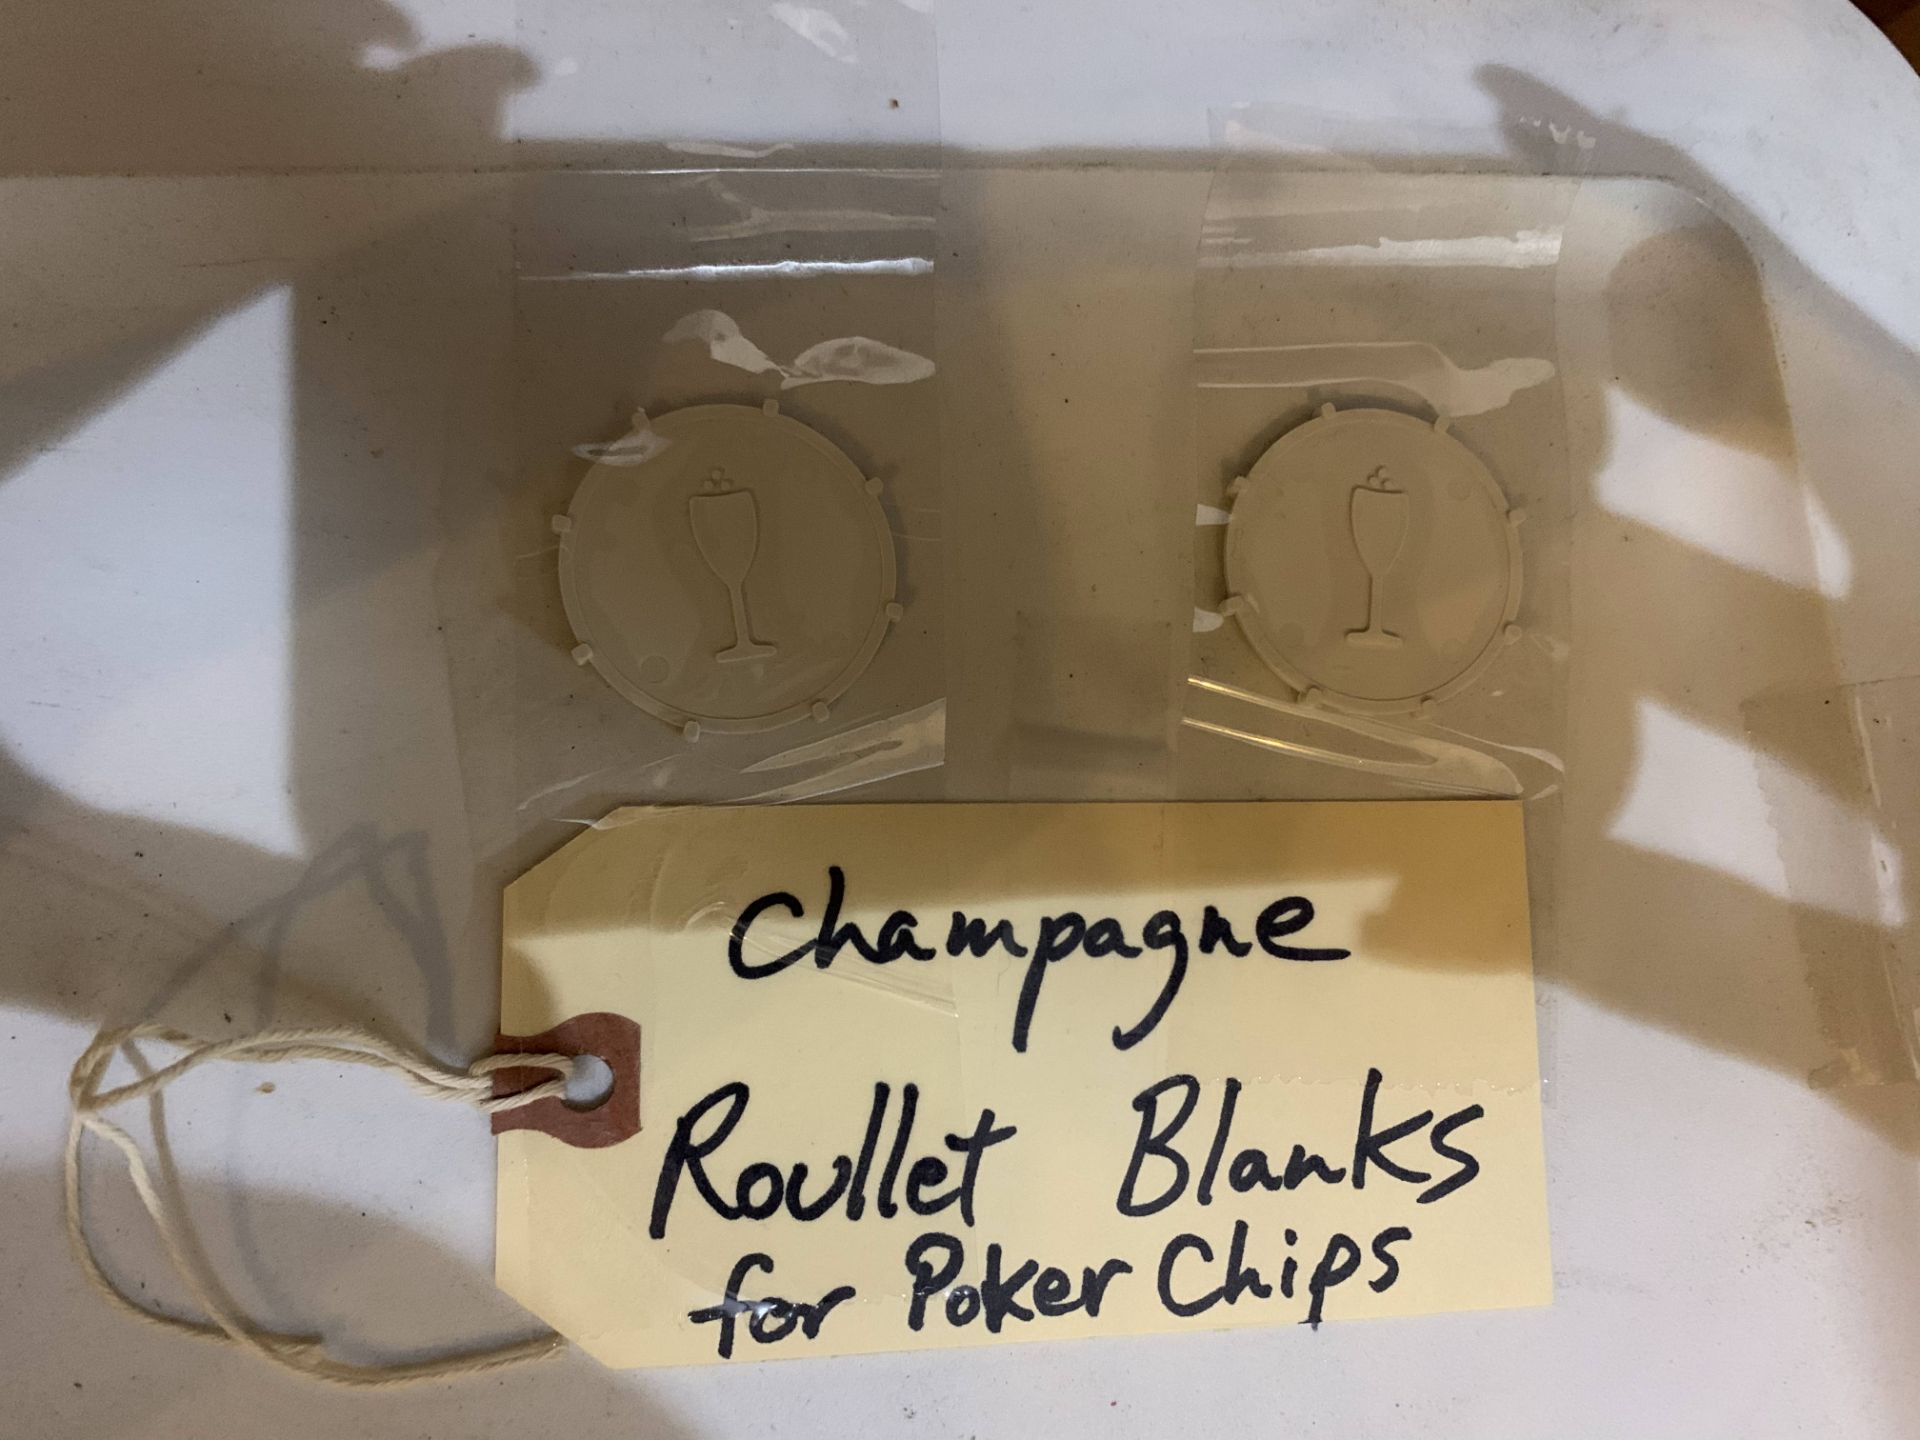 CHAMPAGNE ROULETTE BLANKS FOR POKER CHIPS - Image 2 of 2